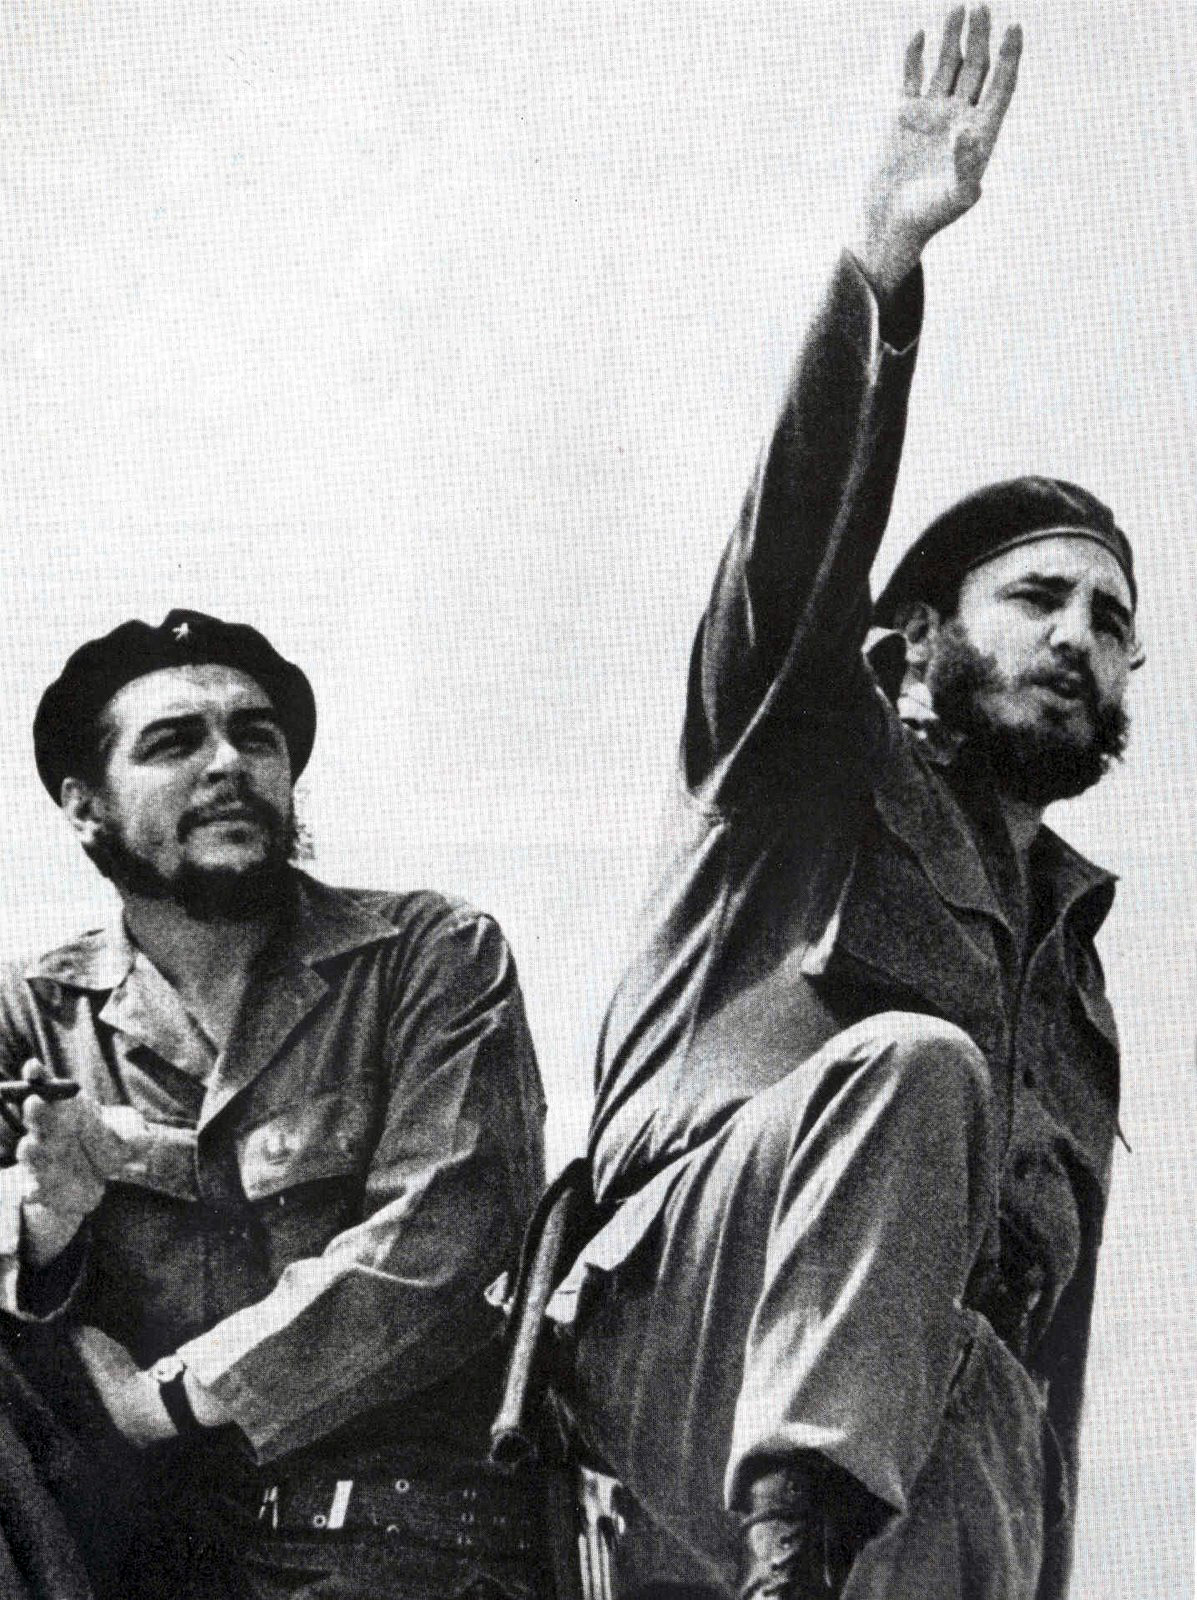 Che Guevara - Fidel in 1959 with 2 Rolex watches in Cuba, photo